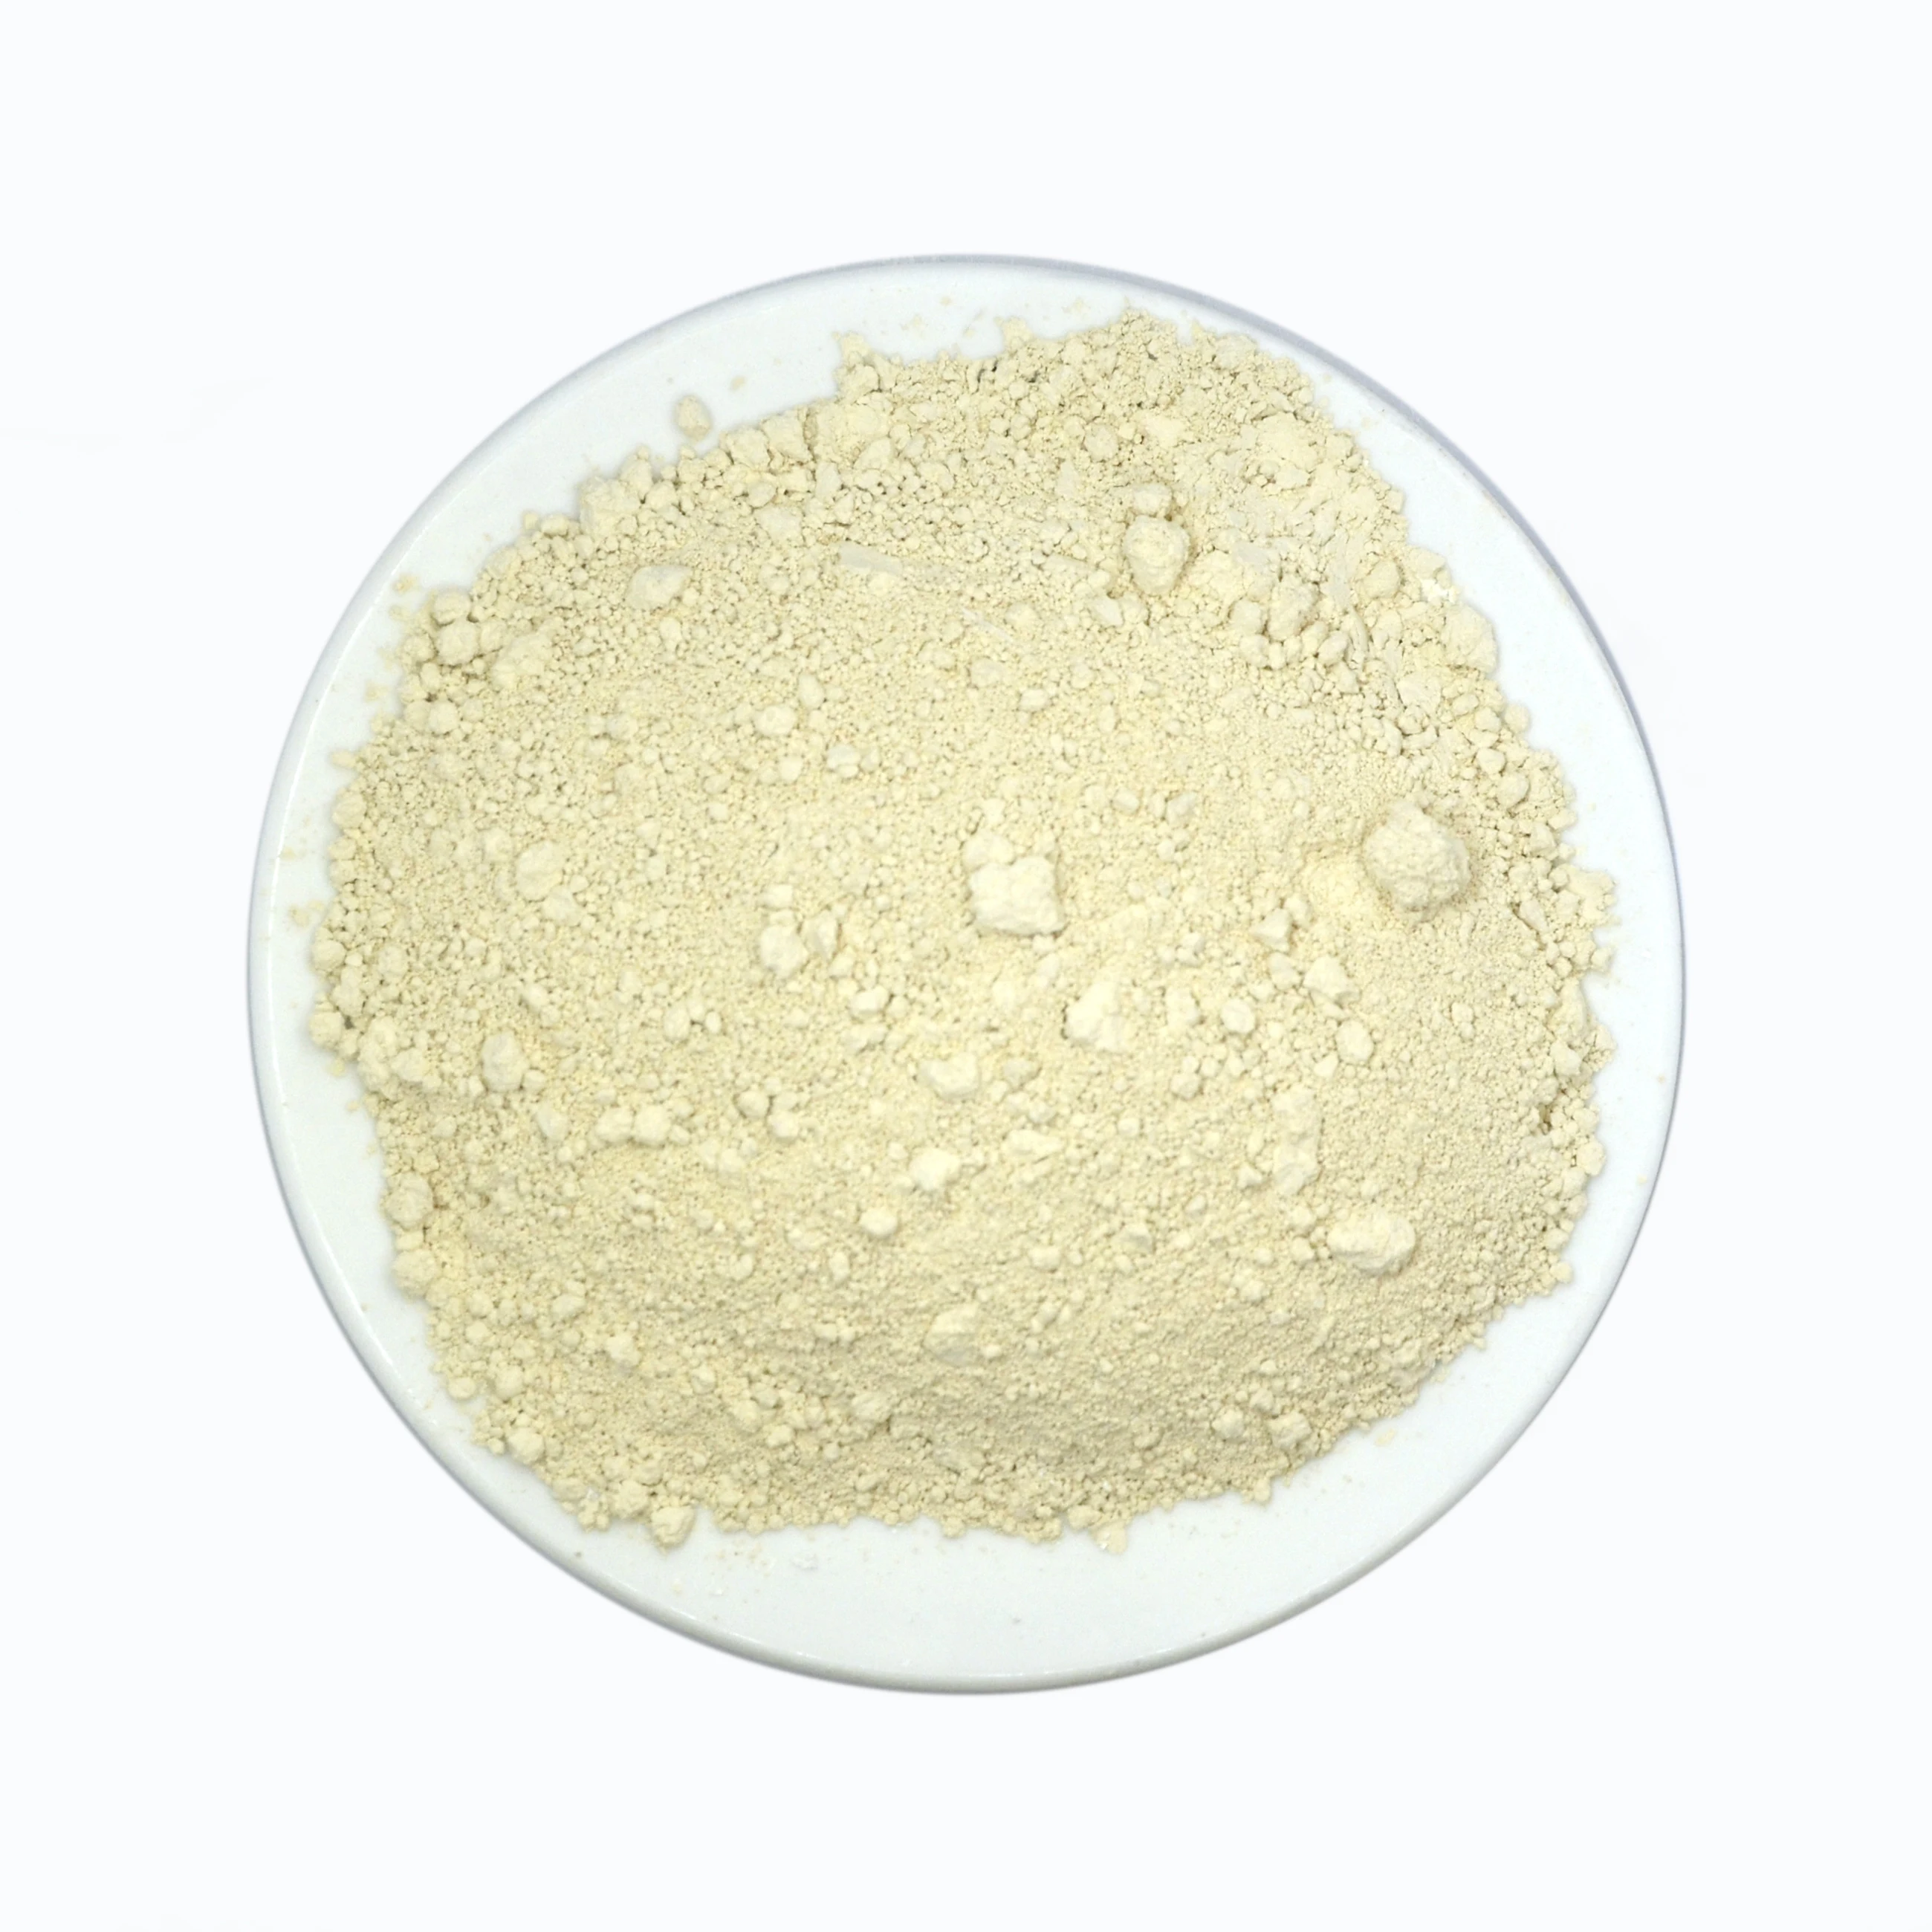 Cheaps price calcined wash kaolin clay powder metakaolin for paper making paint industry